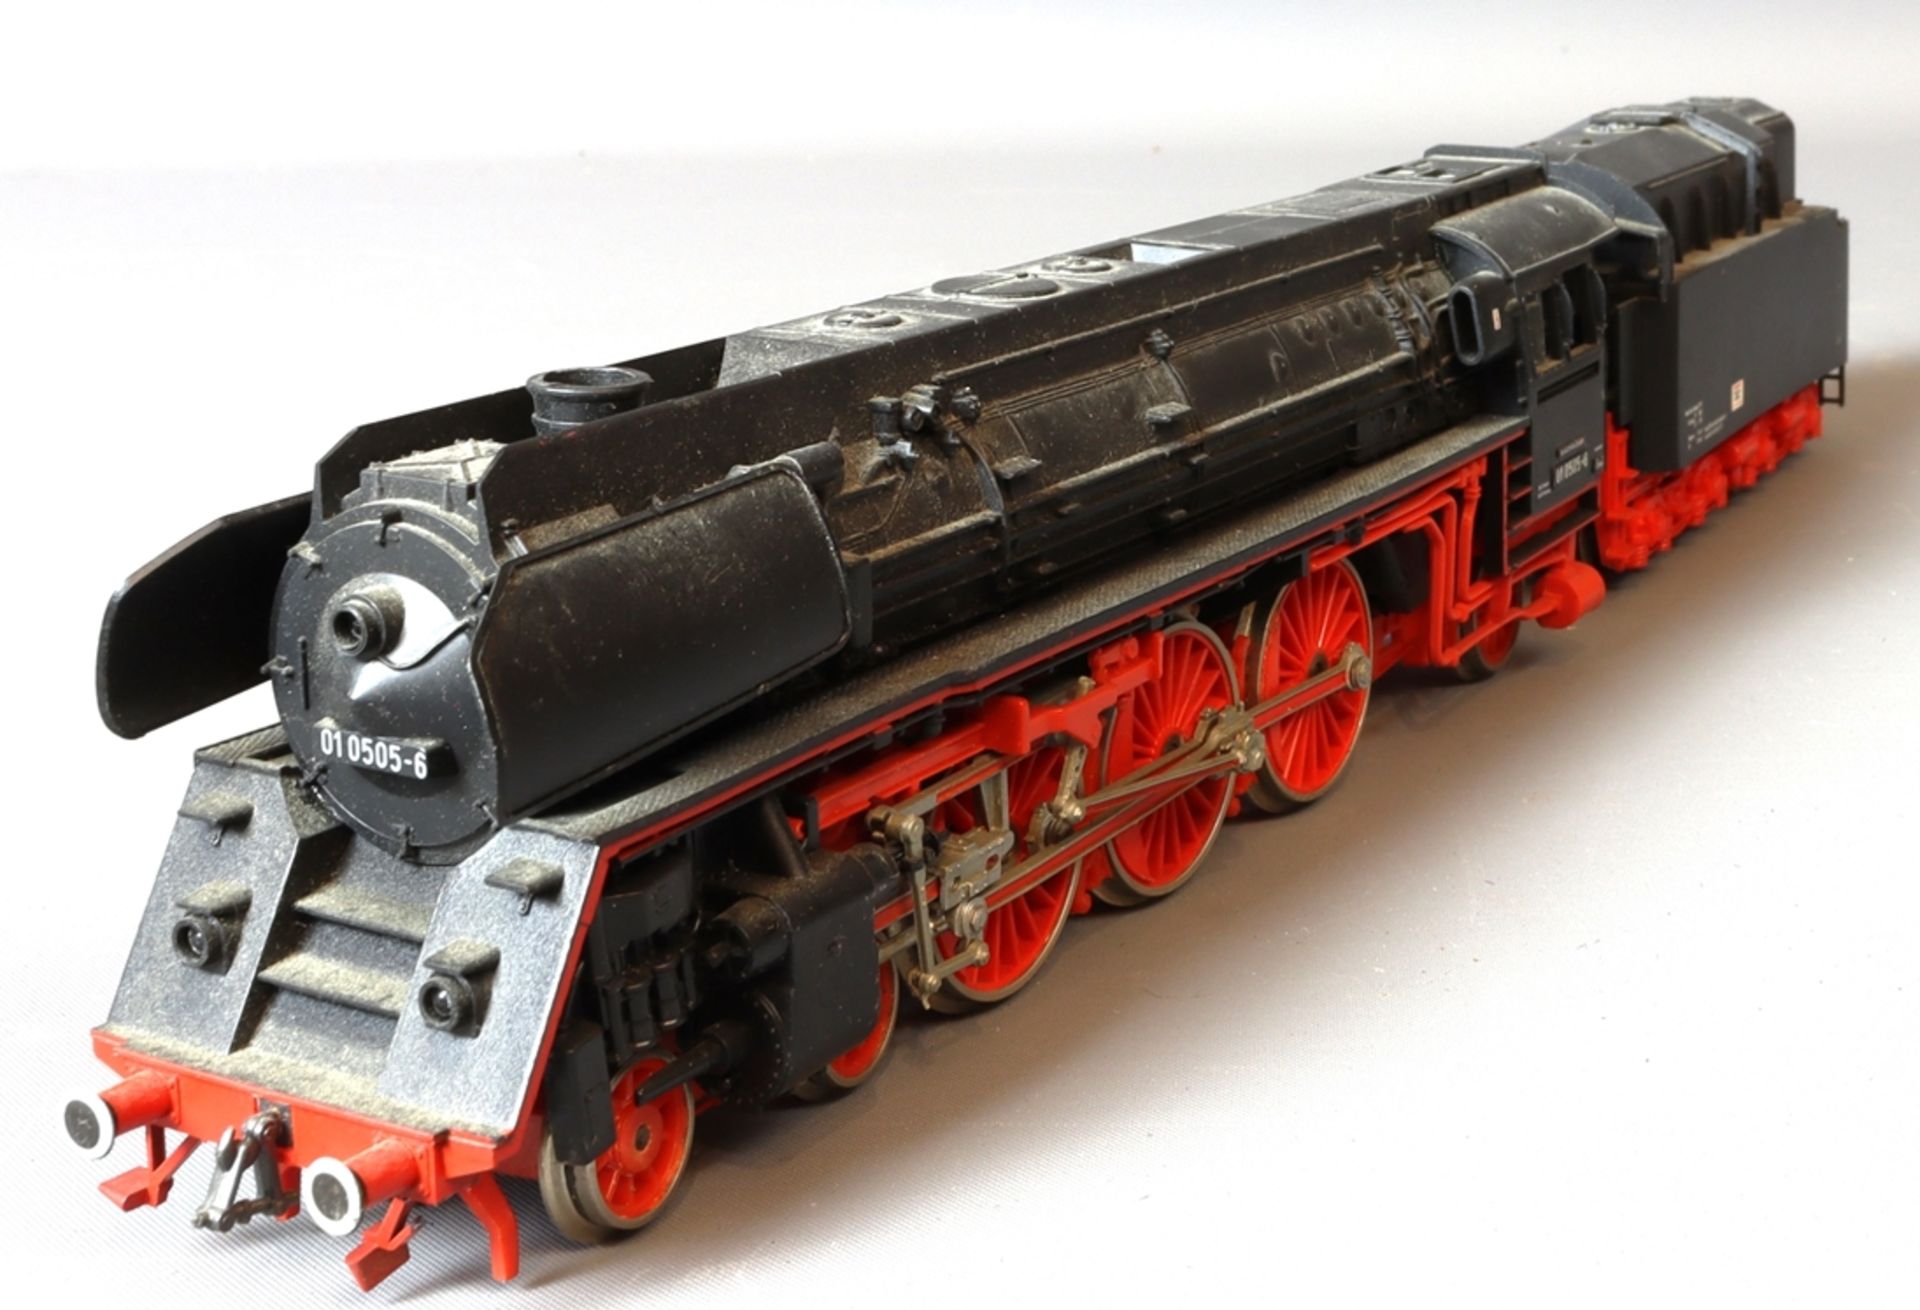 Piko steam locomotive with tender 01 0505-6, second half of the 20th century, German